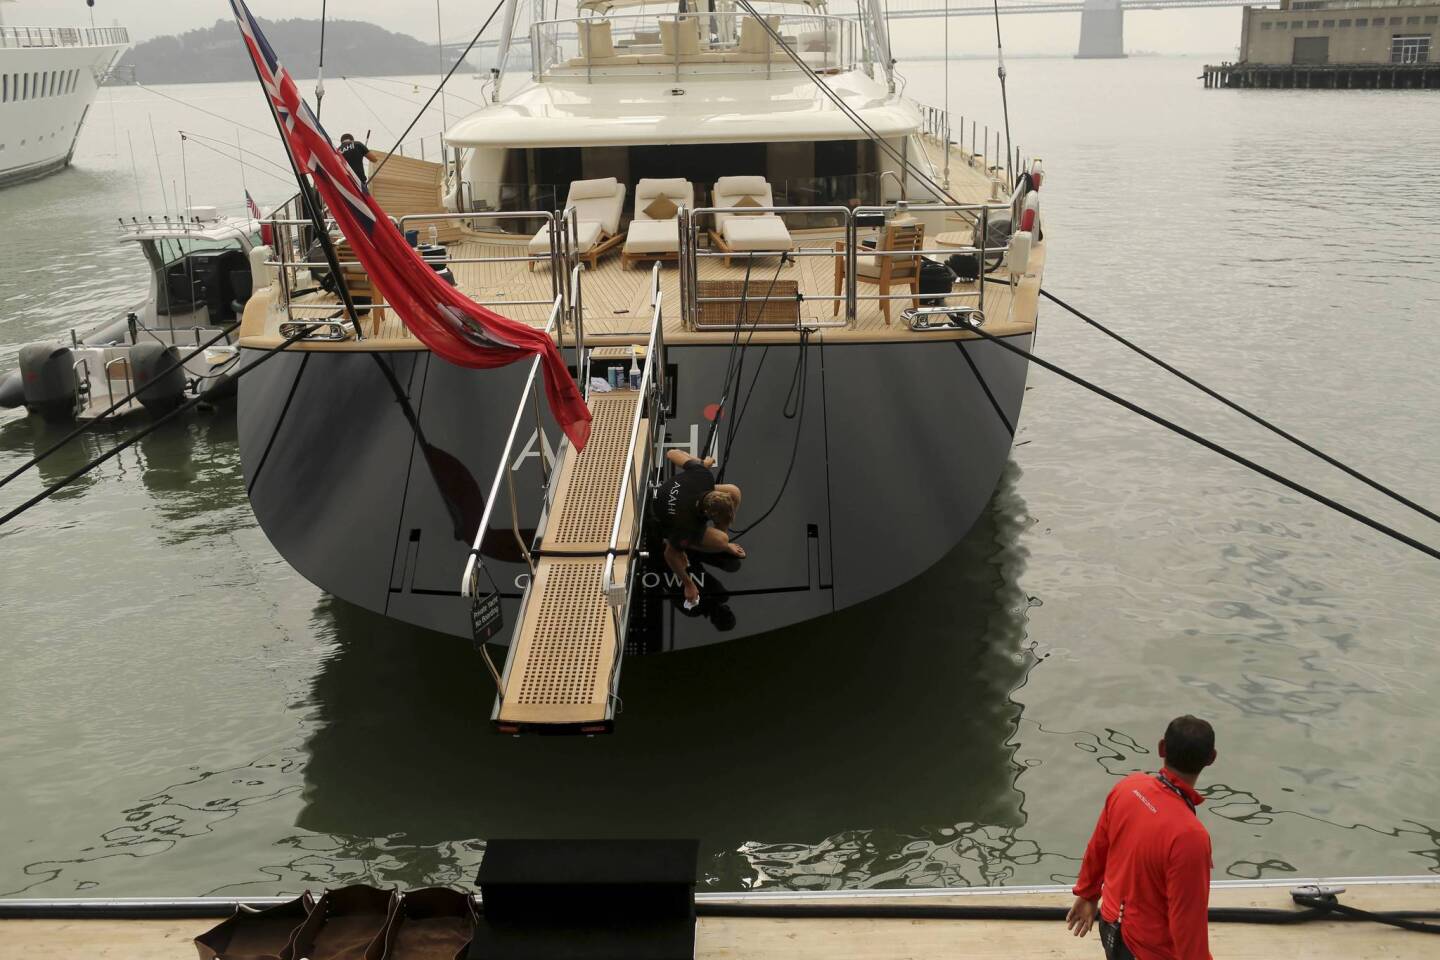 A crew member cleans the sailing yacht "Asahi," belonging to Oracle CEO Larry Ellison, at the America's Cup Center prior to the round robin one yacht races of the Luis Vuitton Cup challenger series in the 34th America's Cup in San Francisco